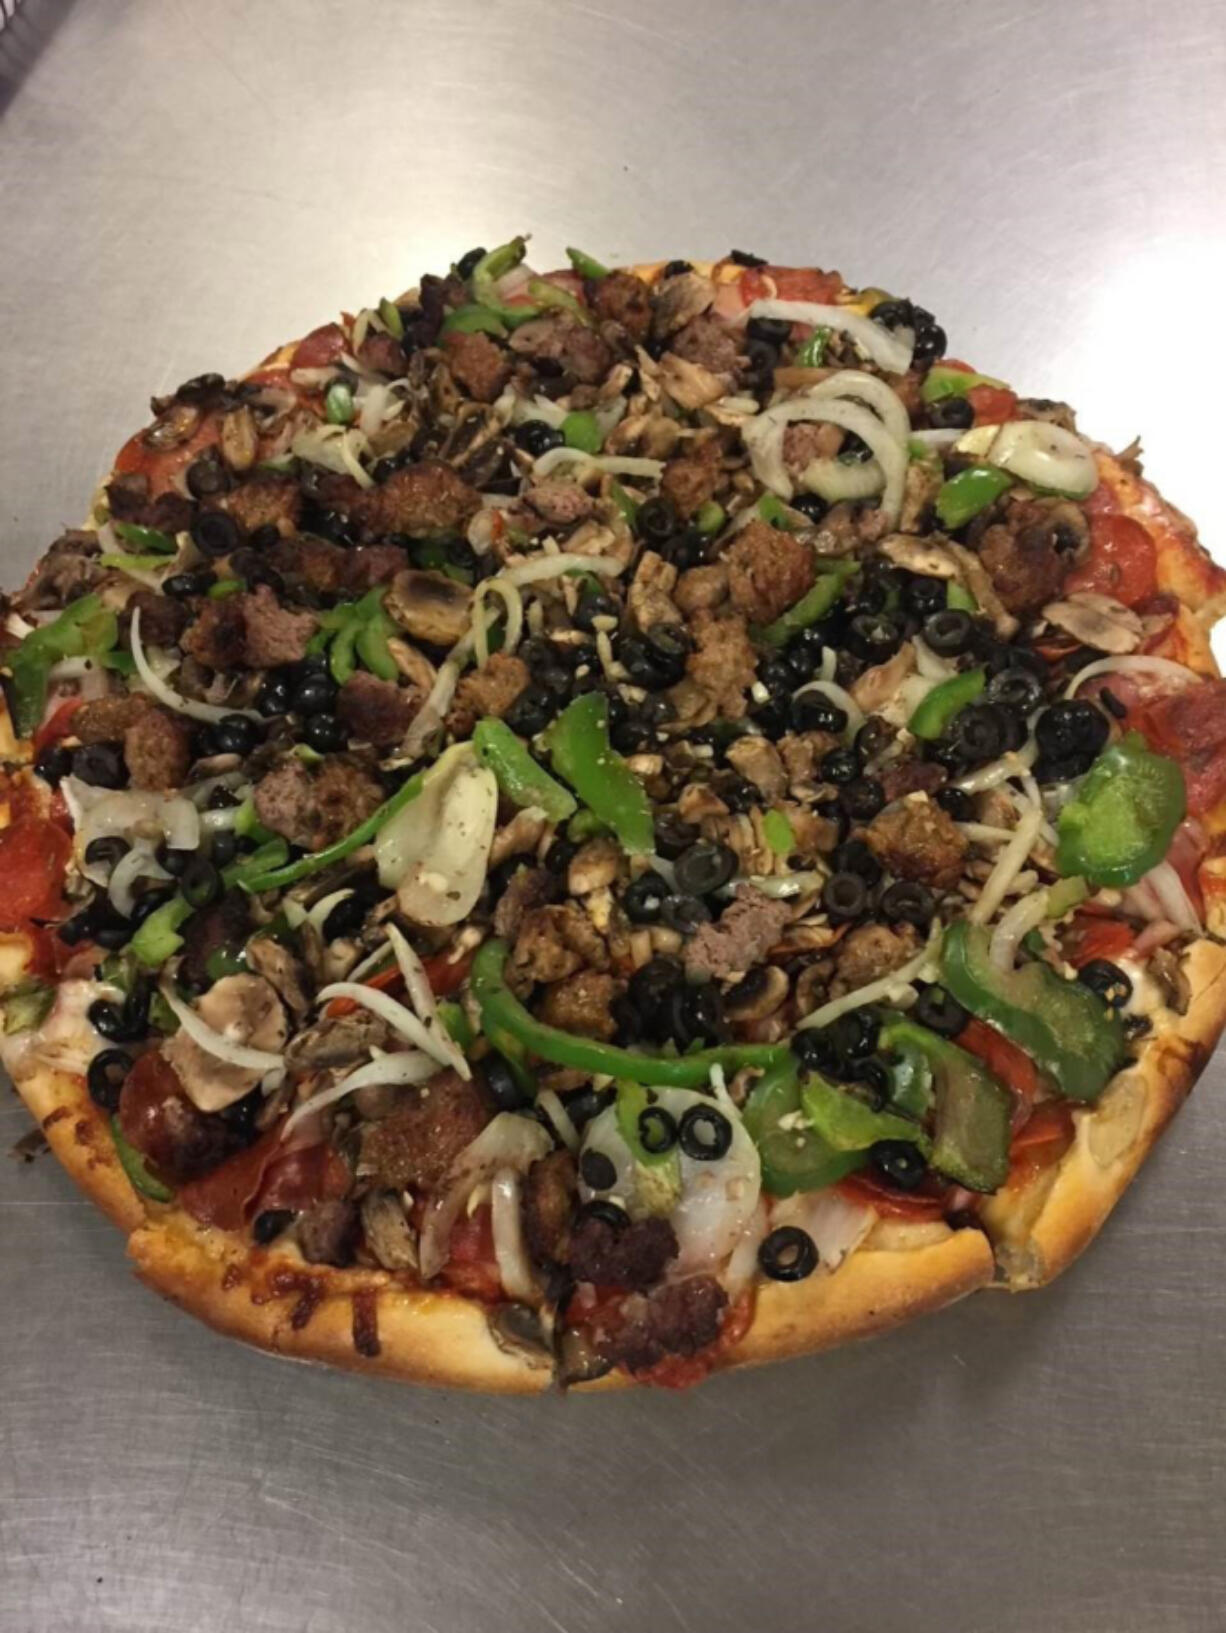 The Hurricane is Juliano&#039;s signature pie. It&#039;s topped with pepperoni, salami, onions, Canadian bacon, mushrooms, green peppers, black olives, beef and sausage.